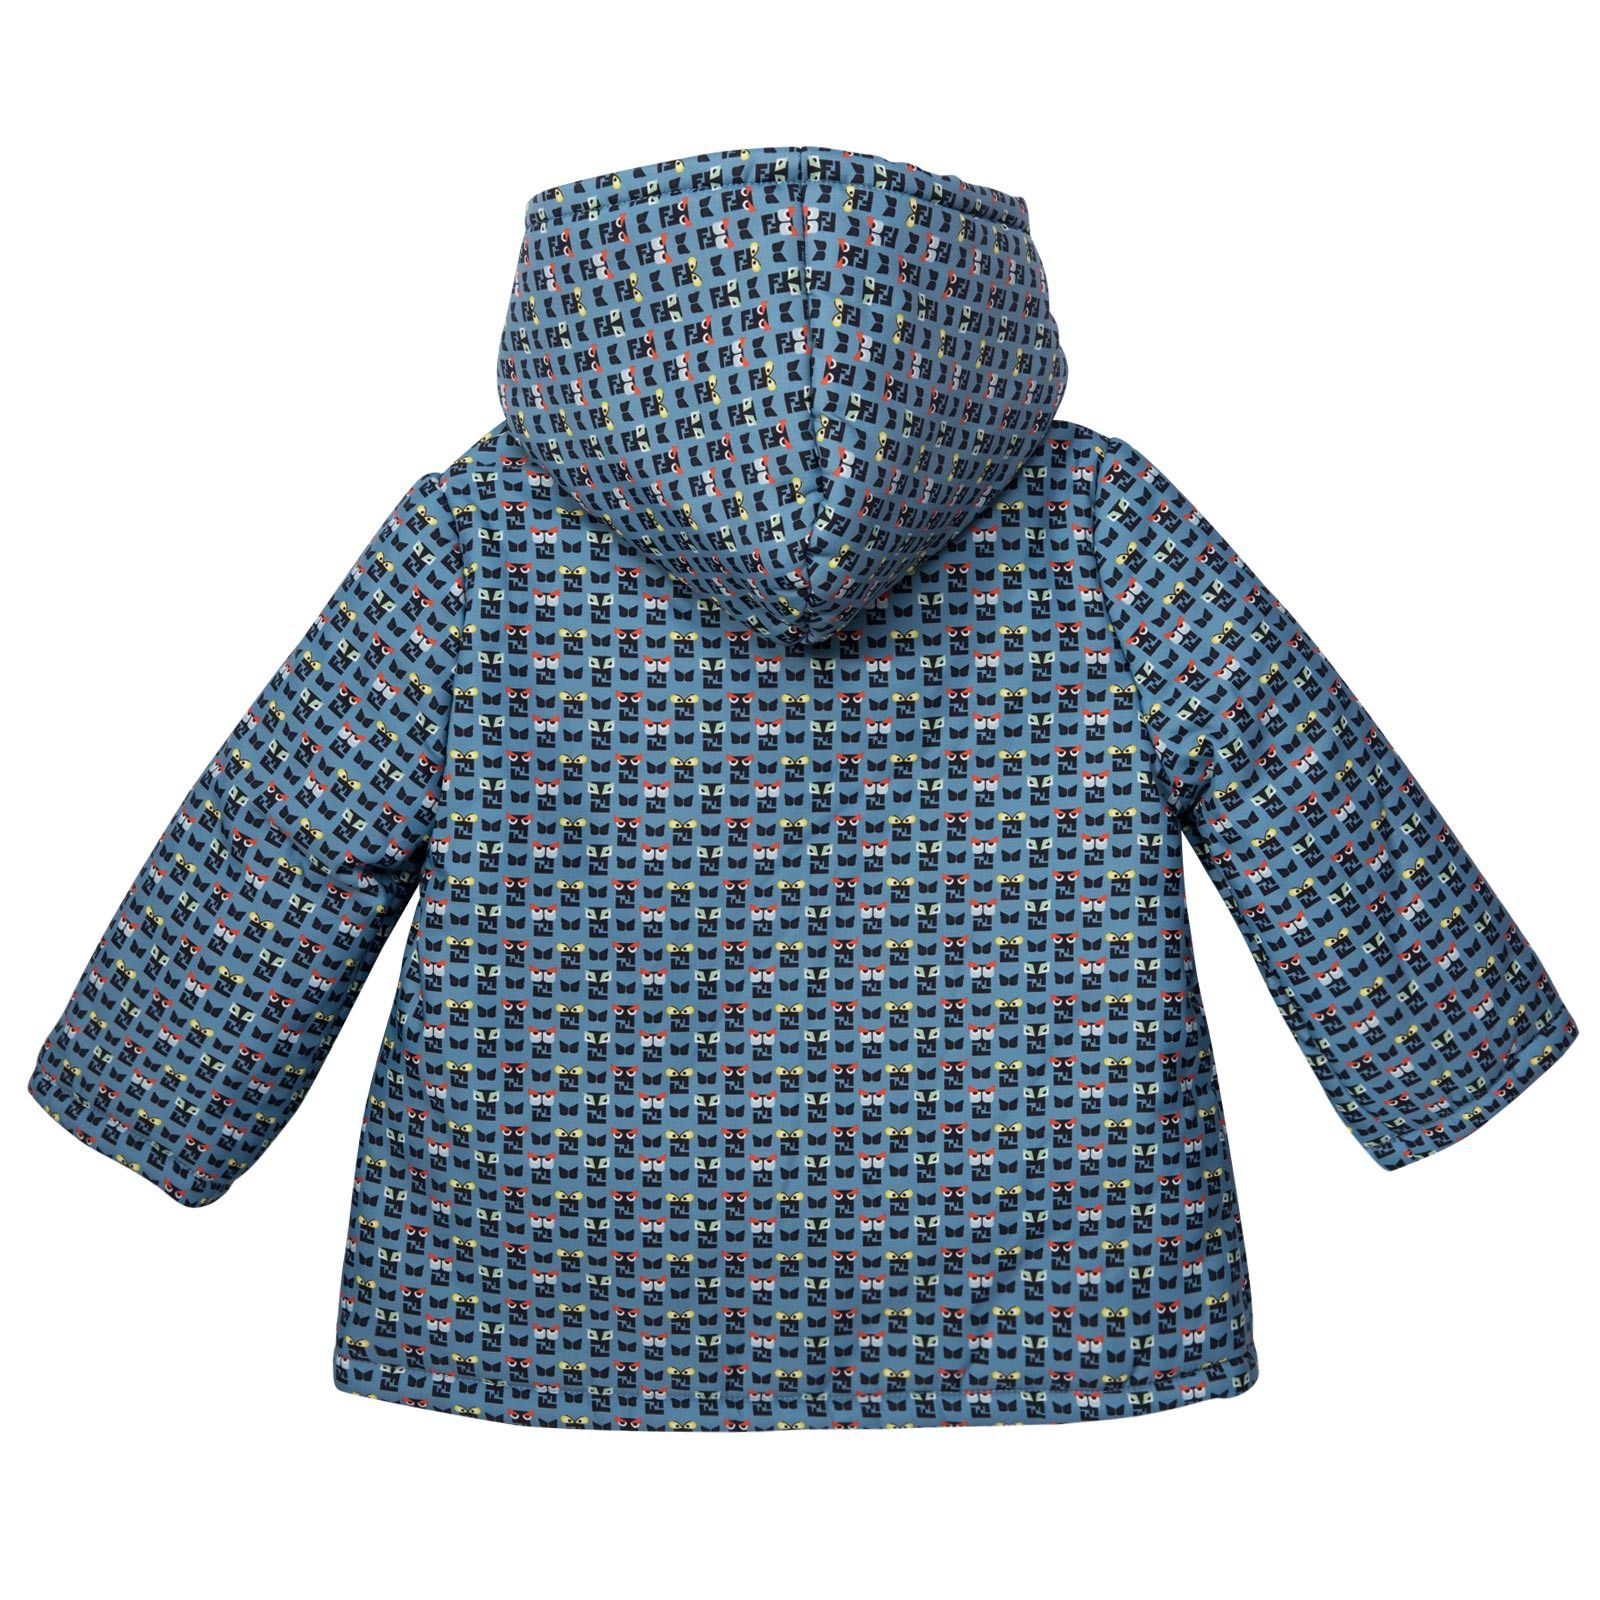 Baby Blue&Mulitcolors 'FF Monster' Printed Jacket - CÉMAROSE | Children's Fashion Store - 2